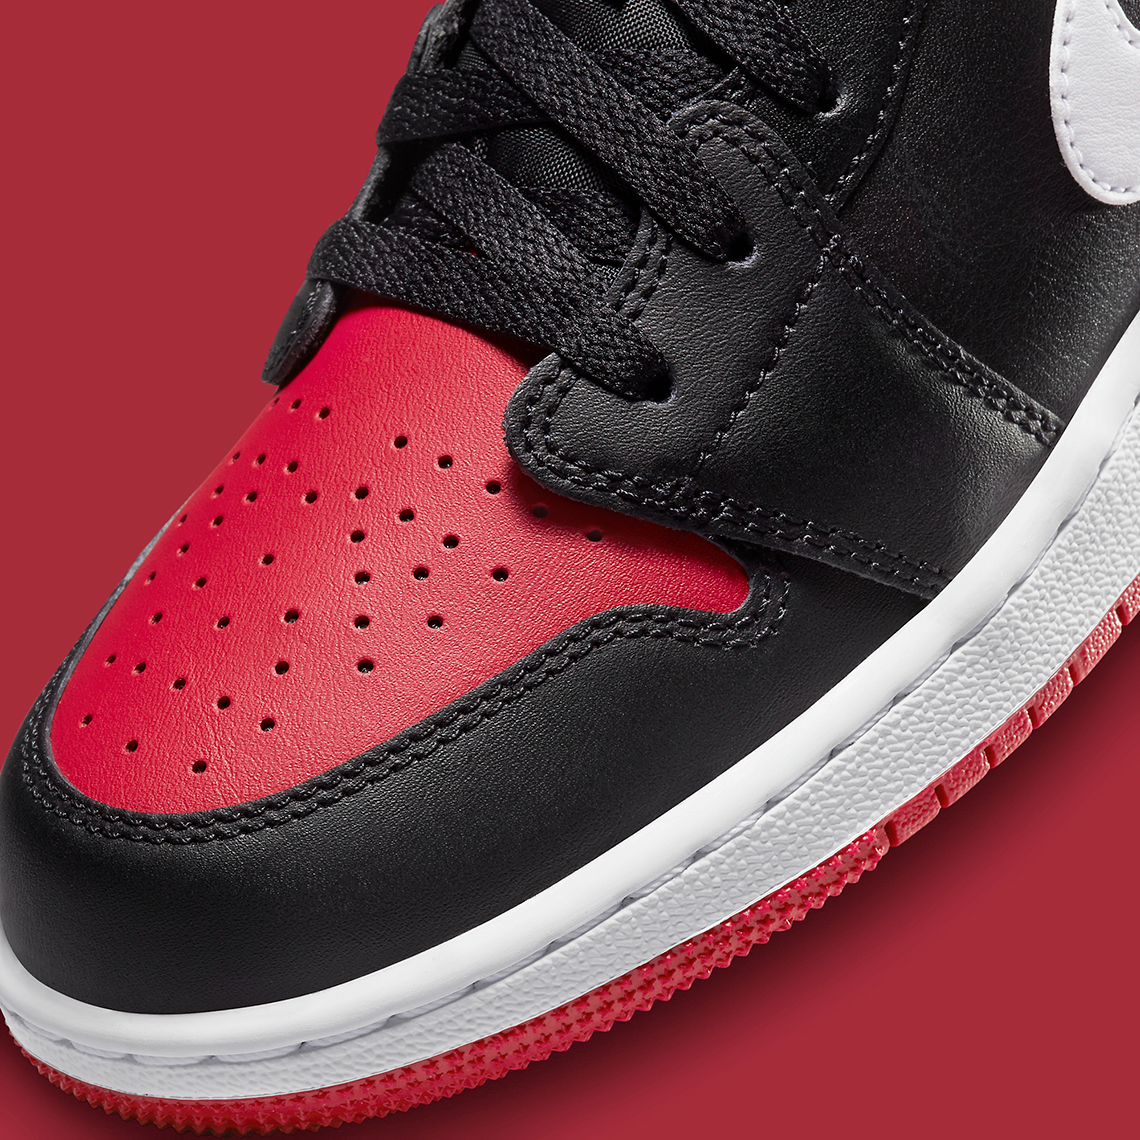 Detailed And On-Feet Look At The Air Jordan 1 Chicago Reimagined 553560 066 6